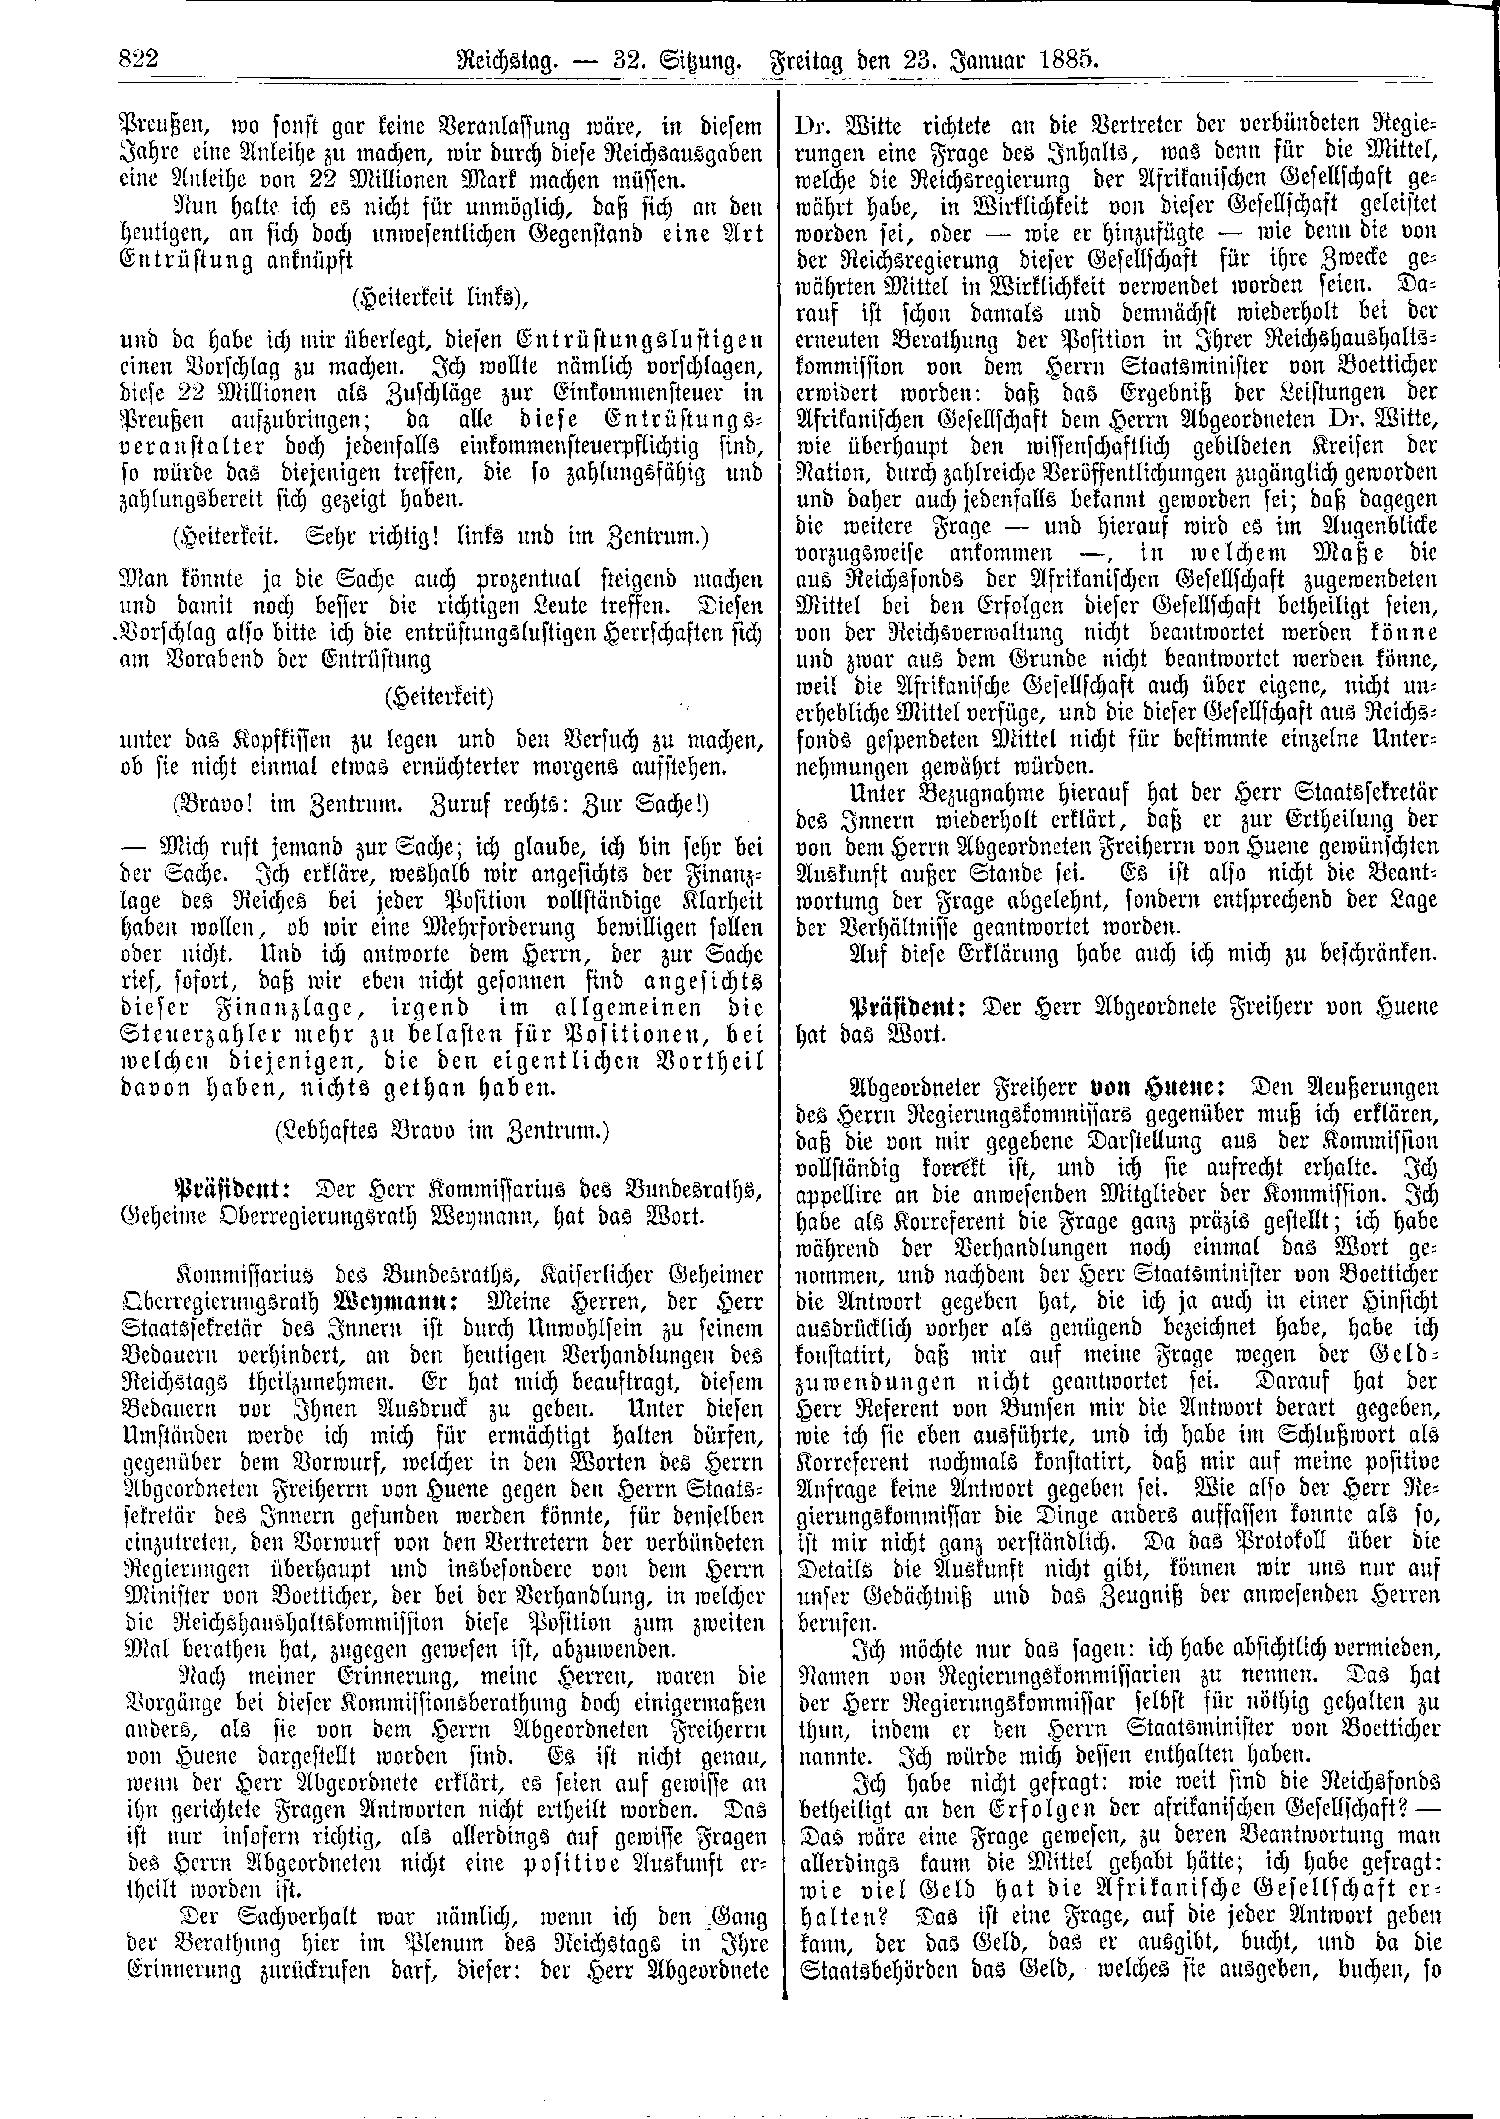 Scan of page 822